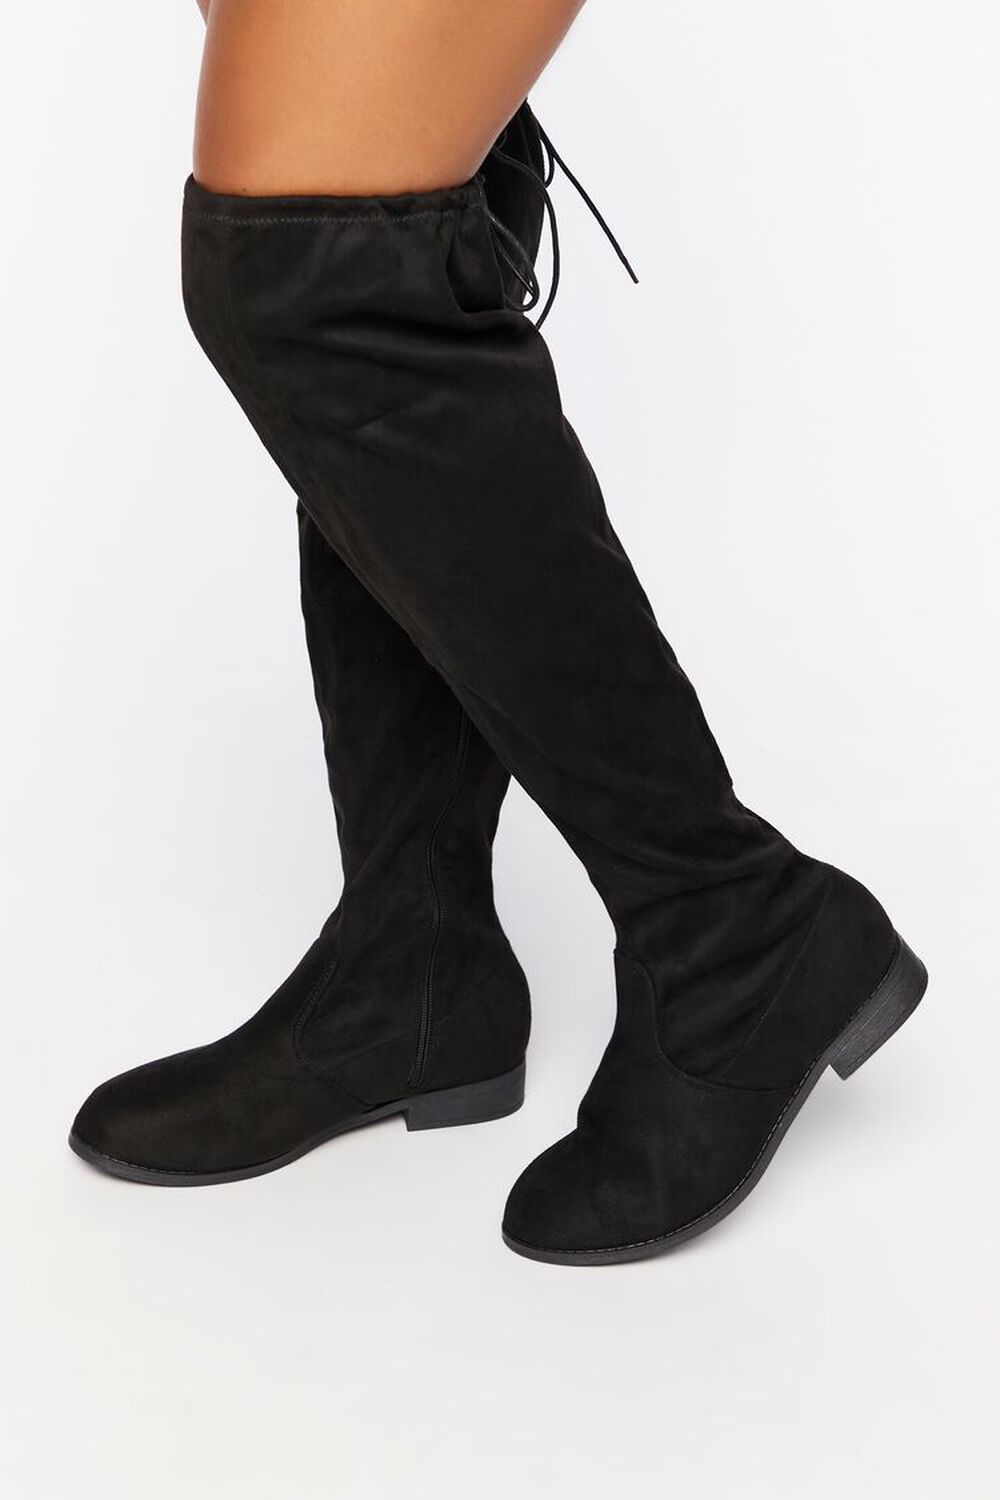 Faux Suede Over-the-Knee Boots (Wide)